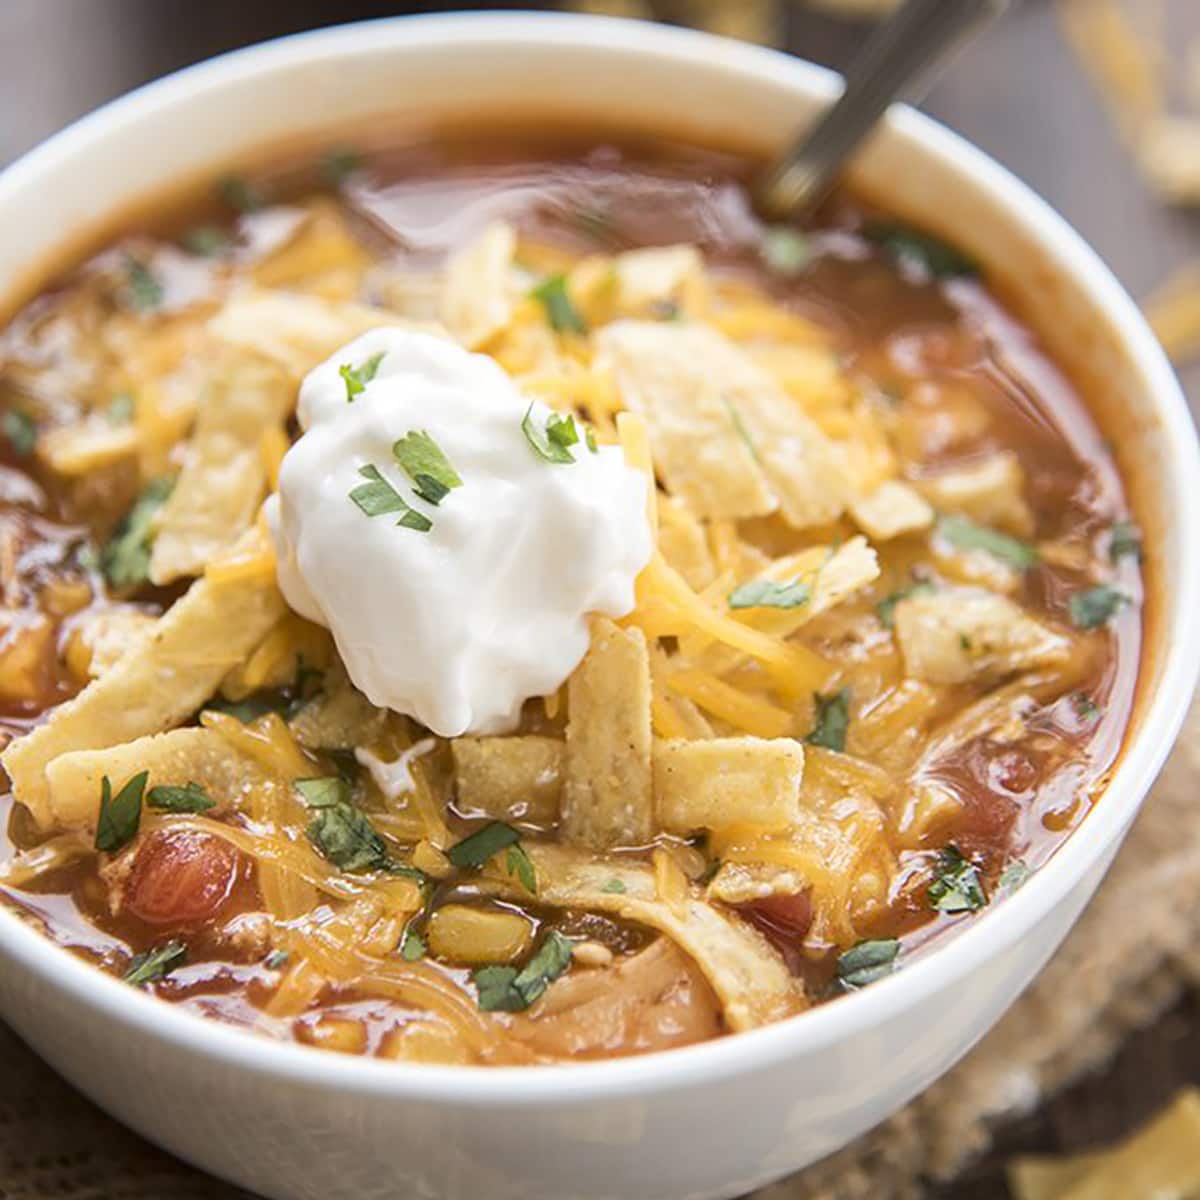 A close up of a bowl of soup topped with tortilla strips, cheese, and a dollop of sour cream.